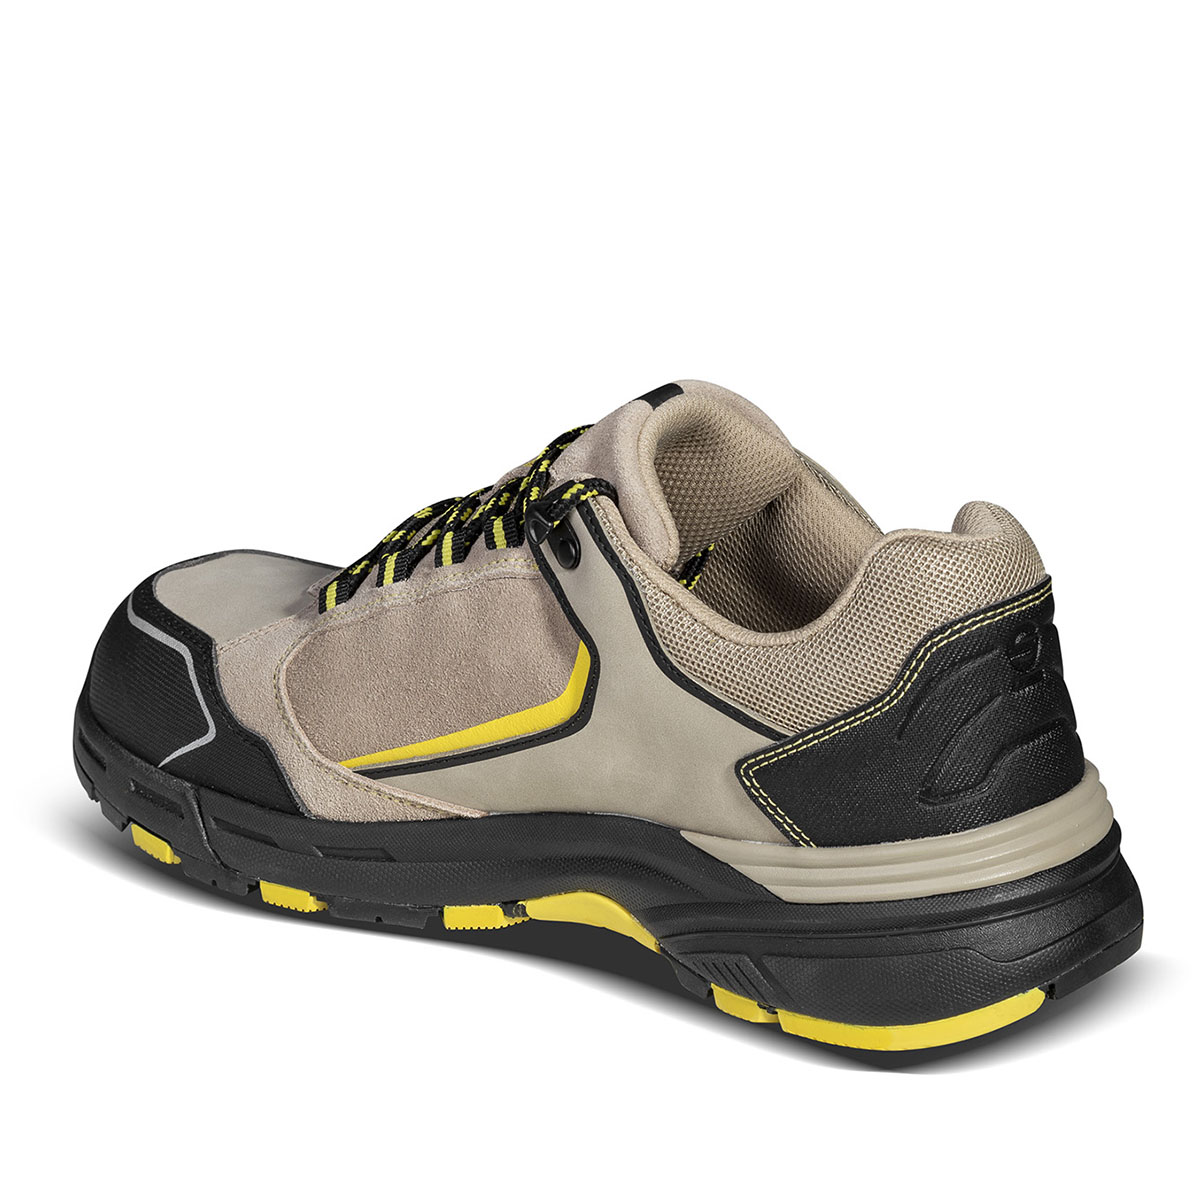 Sparco Nitro S3 SRC Safety shoes only £ 68.68